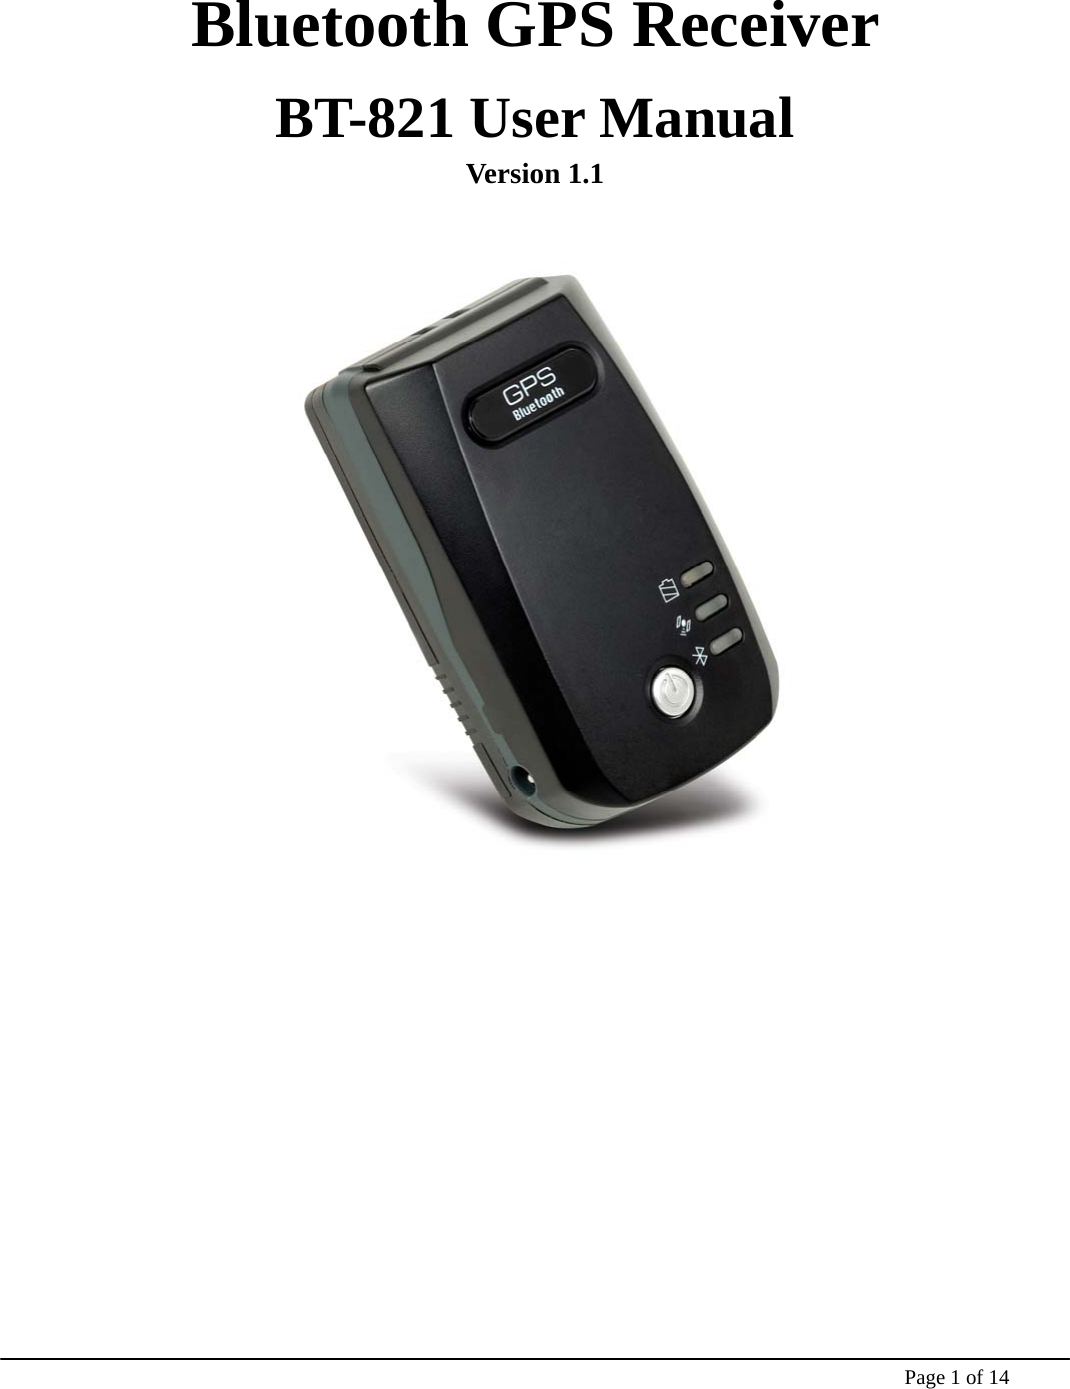    Page 1 of 14    Bluetooth GPS Receiver   BT-821 User Manual   Version 1.1       